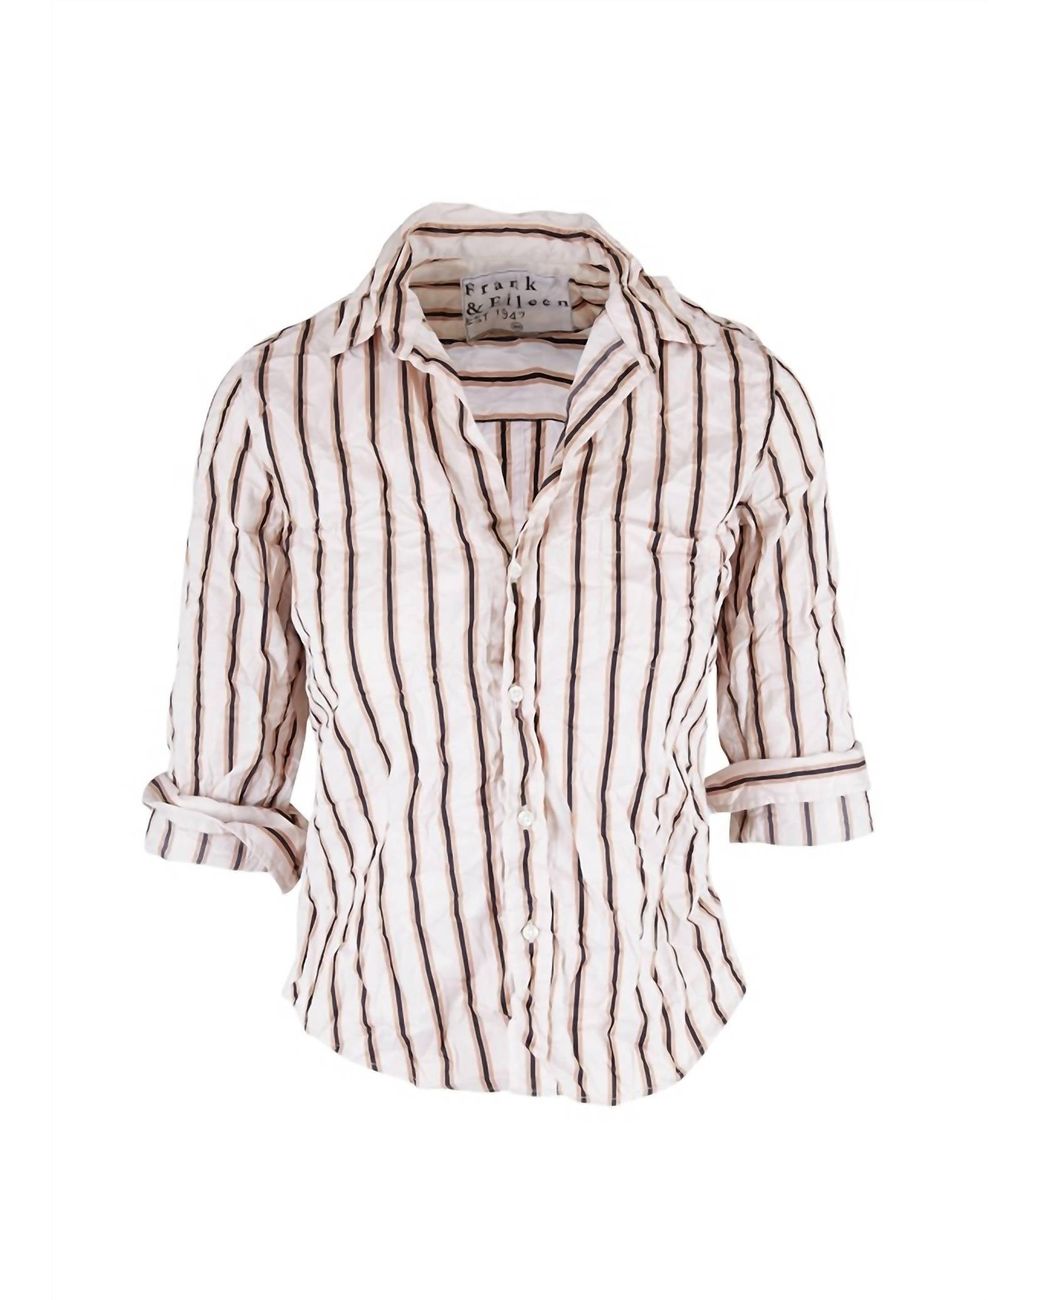 Frank & Eileen Barry Signature Crinkle Button Up Shirt in White | Lyst